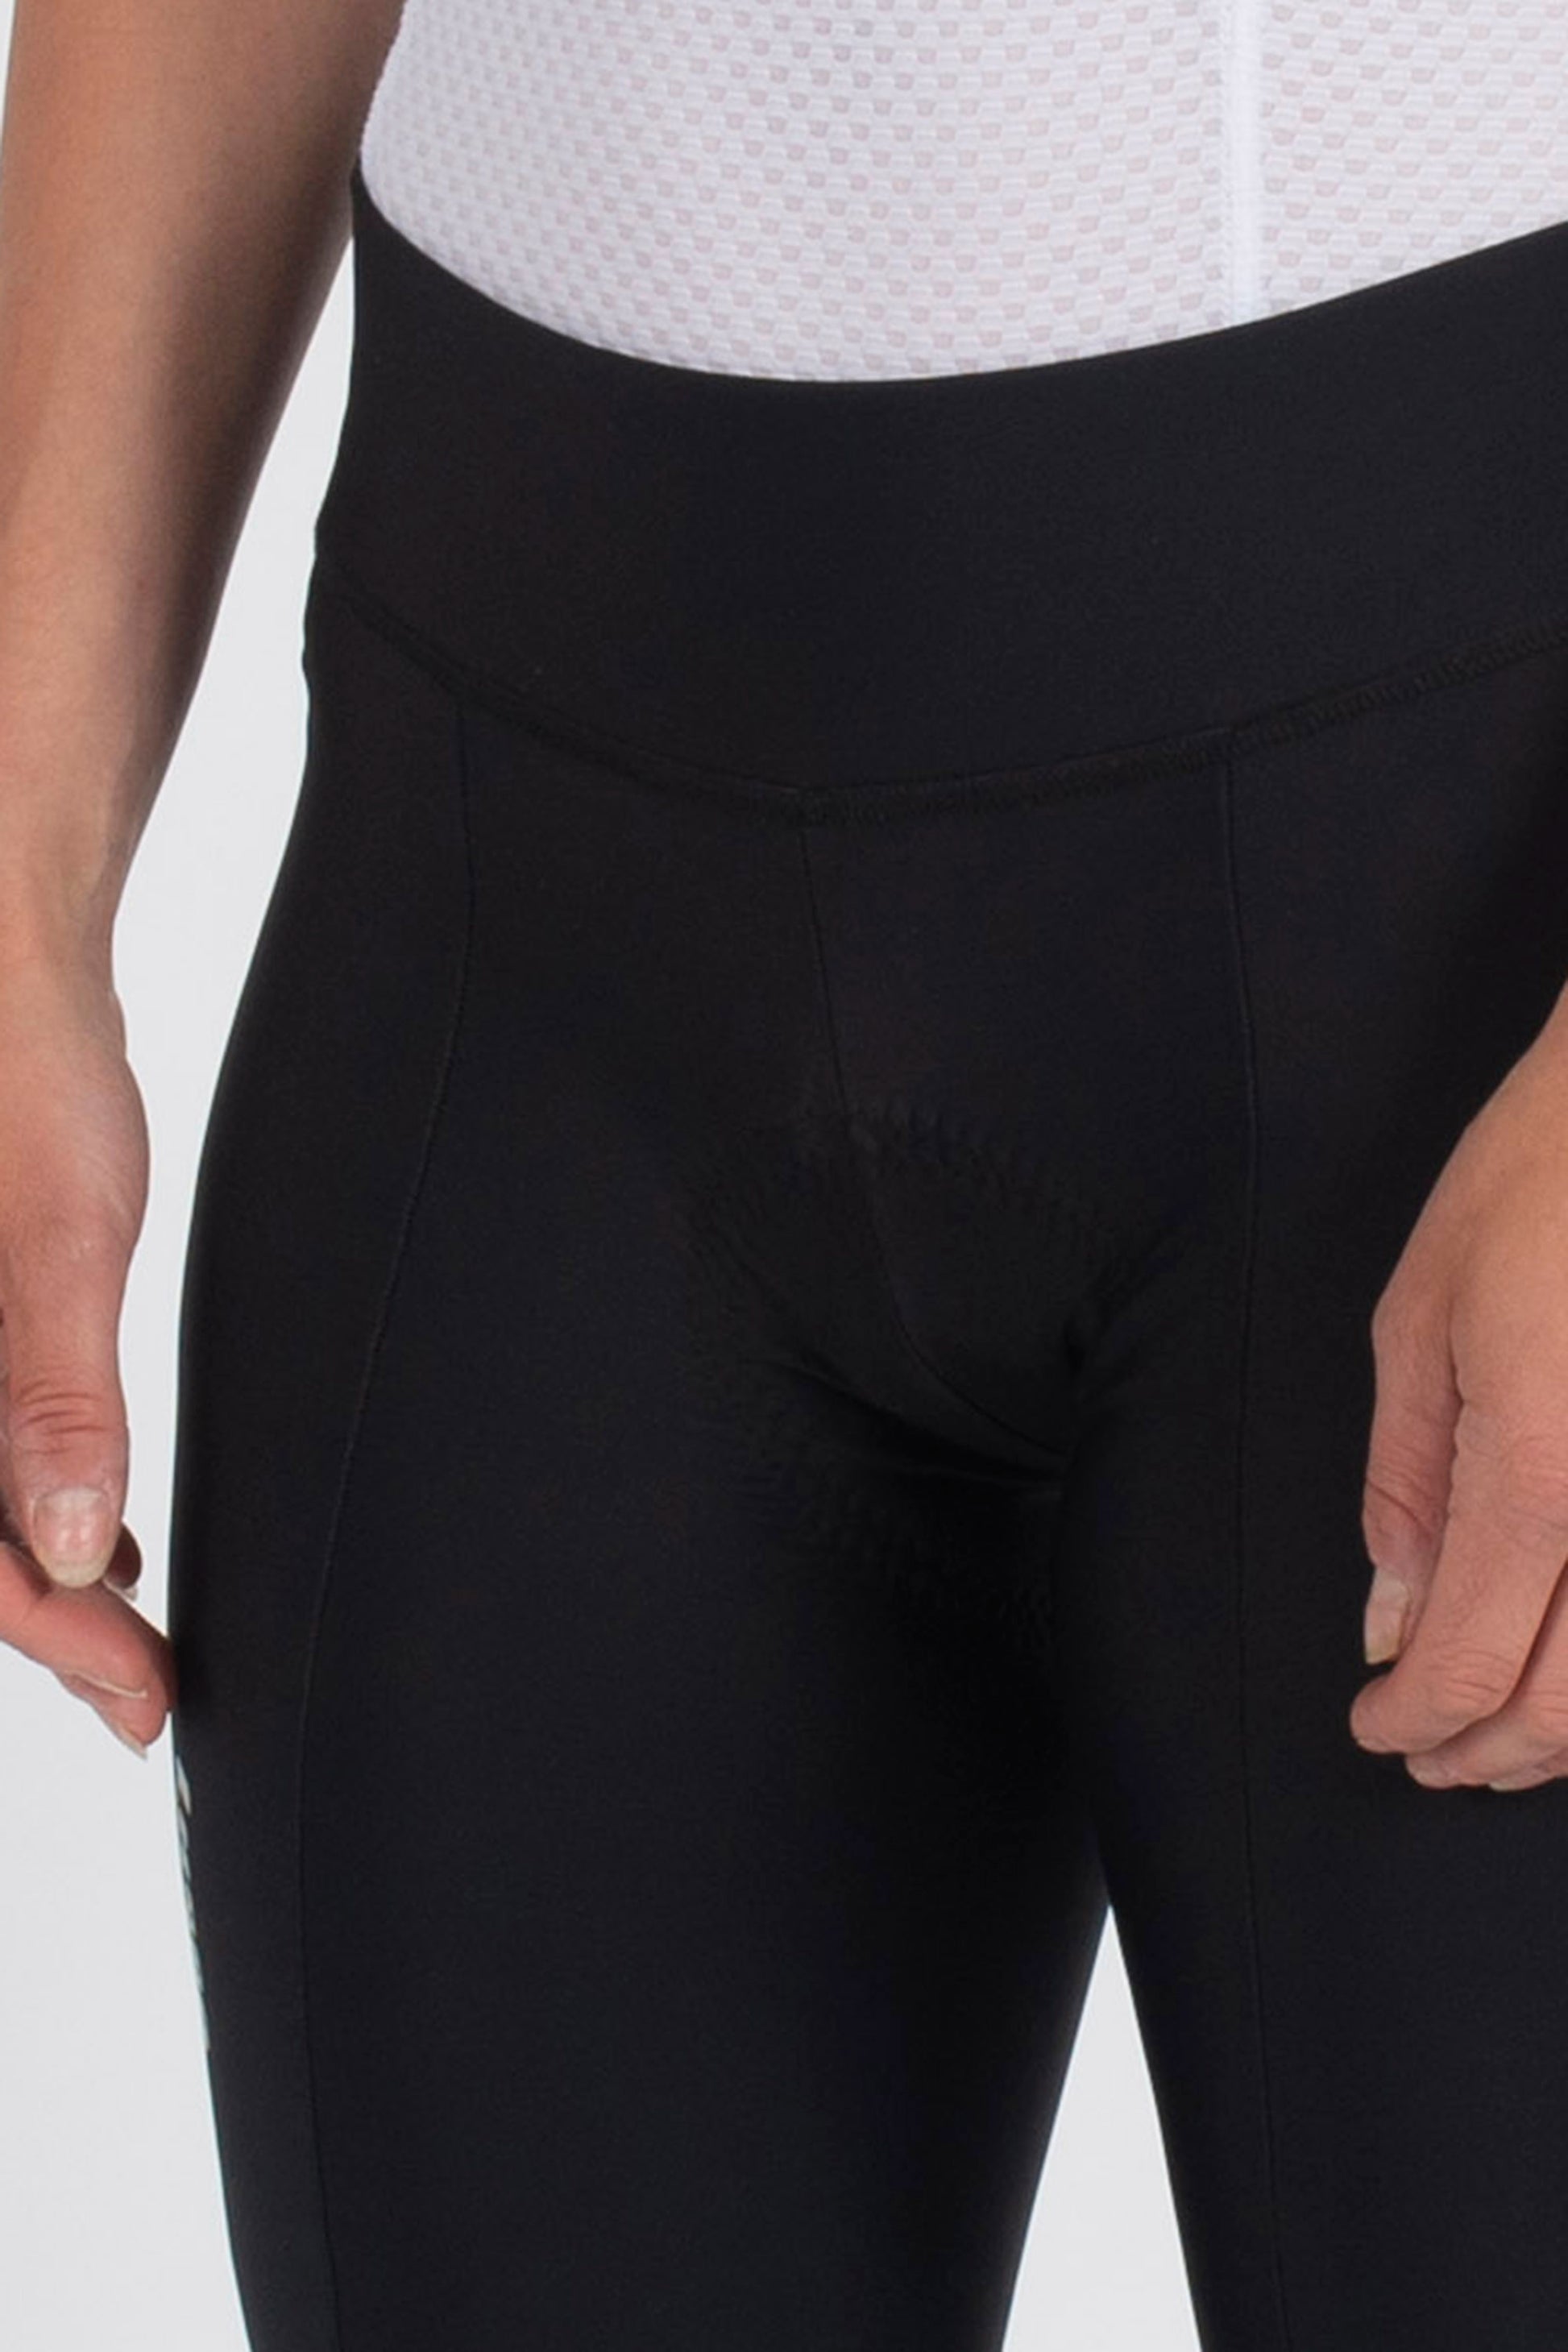 Women's Thermal Tights - Lusso Cycle Wear